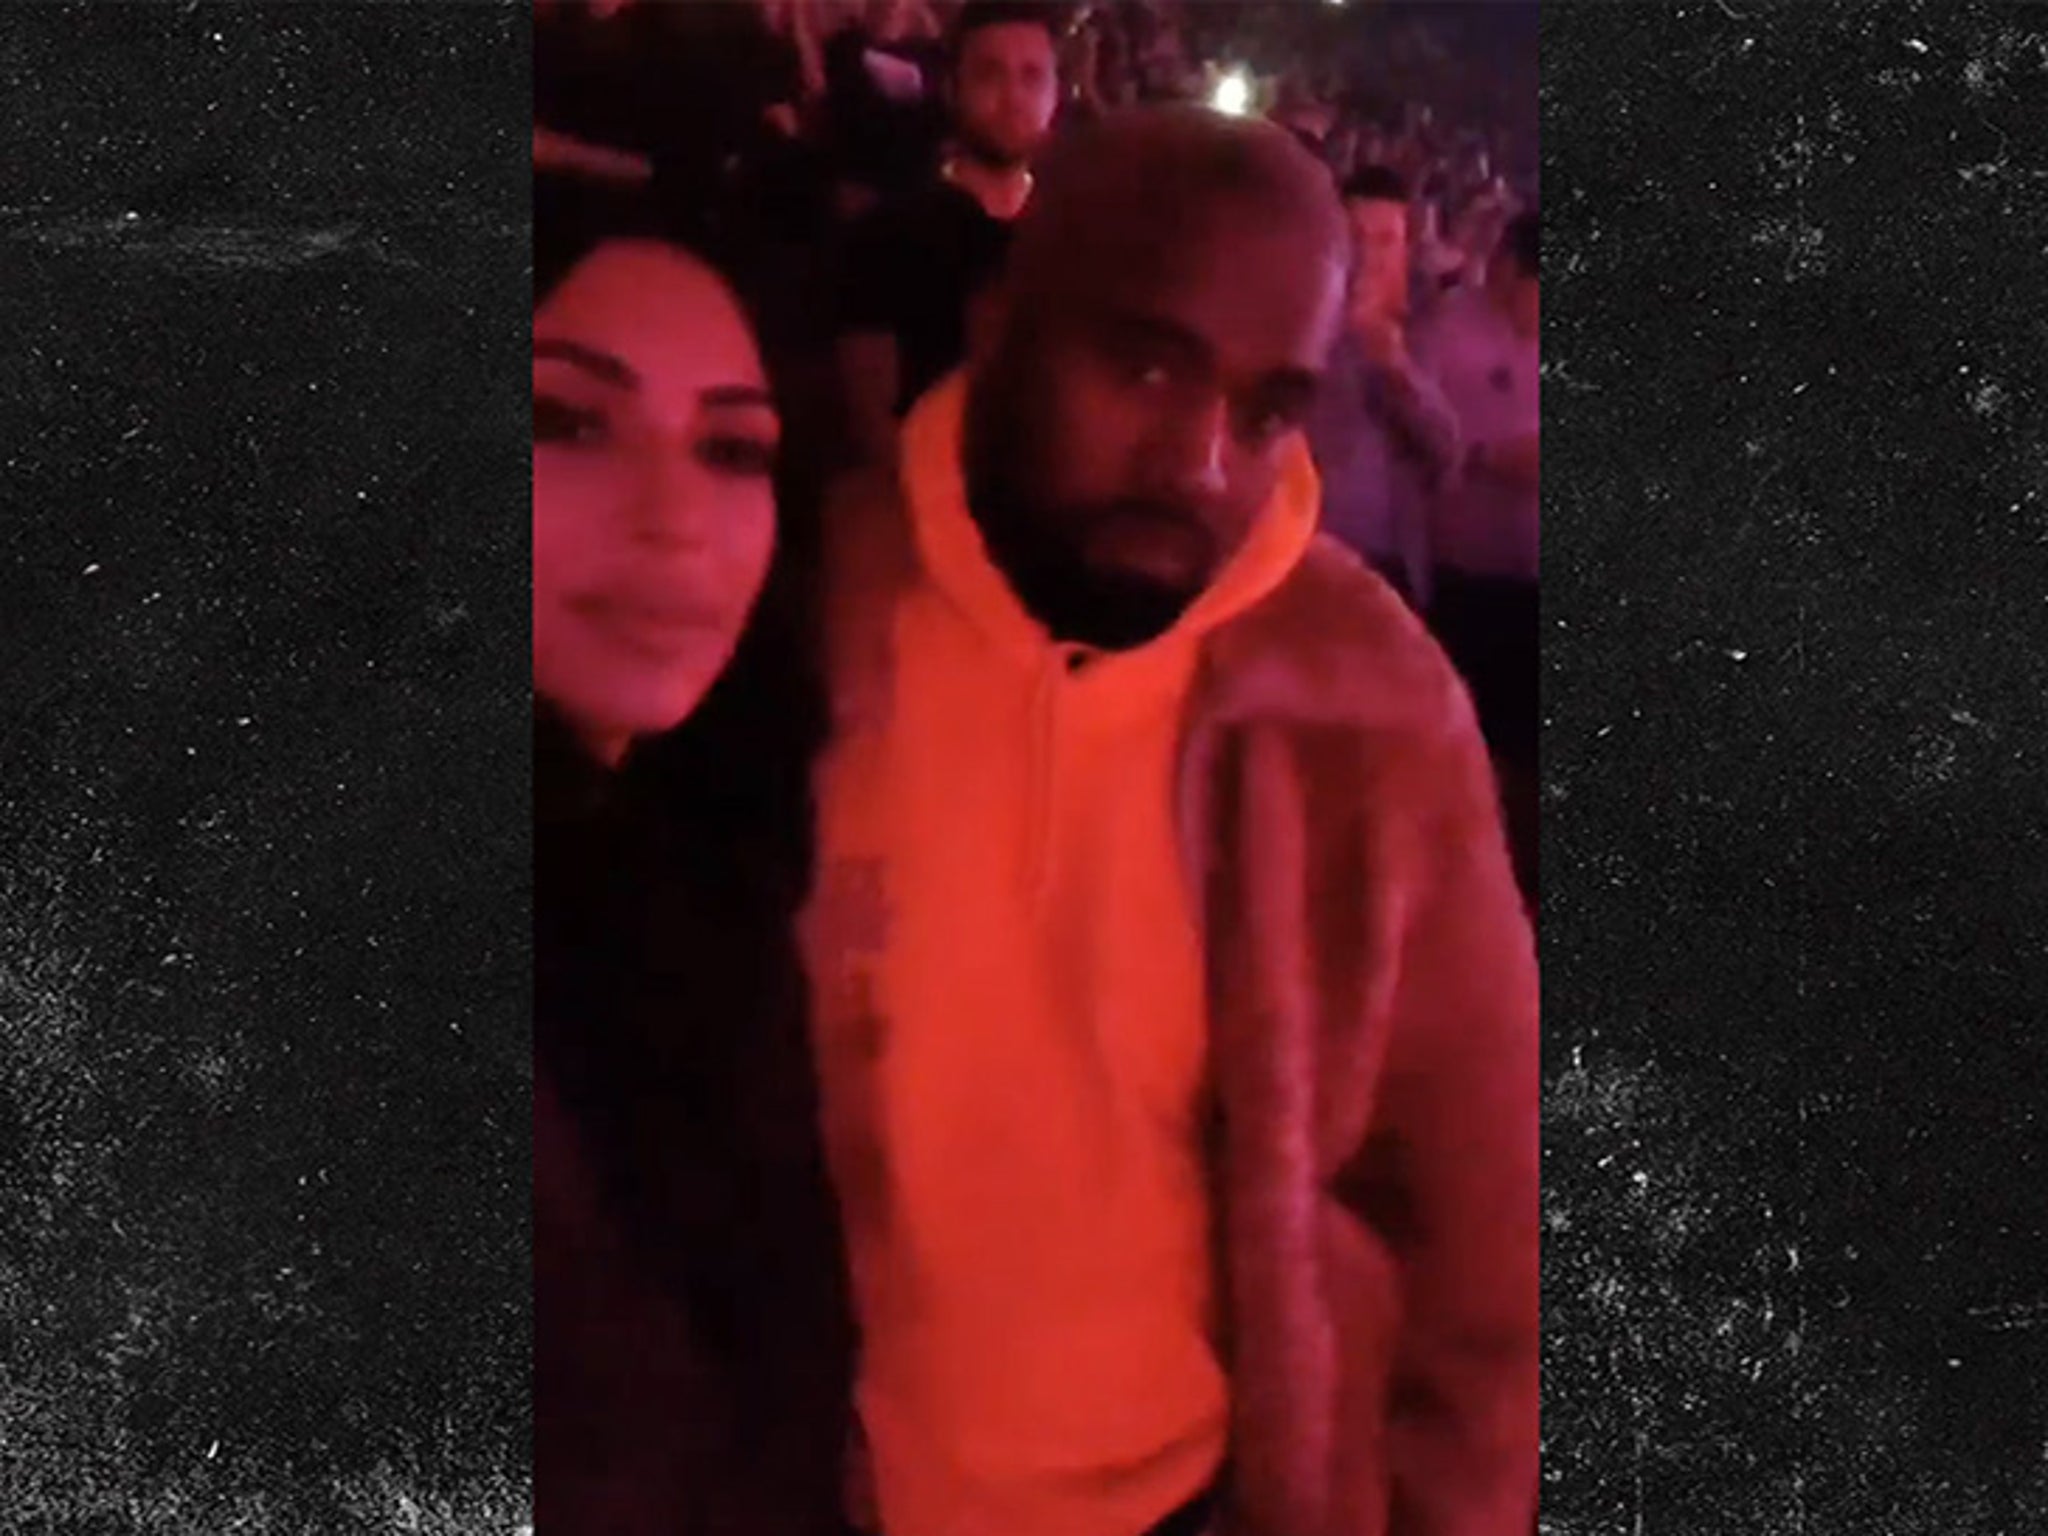 Kanye West Goes to Travis Scott Show in L.A., No 'SICKO MODE' Grudge